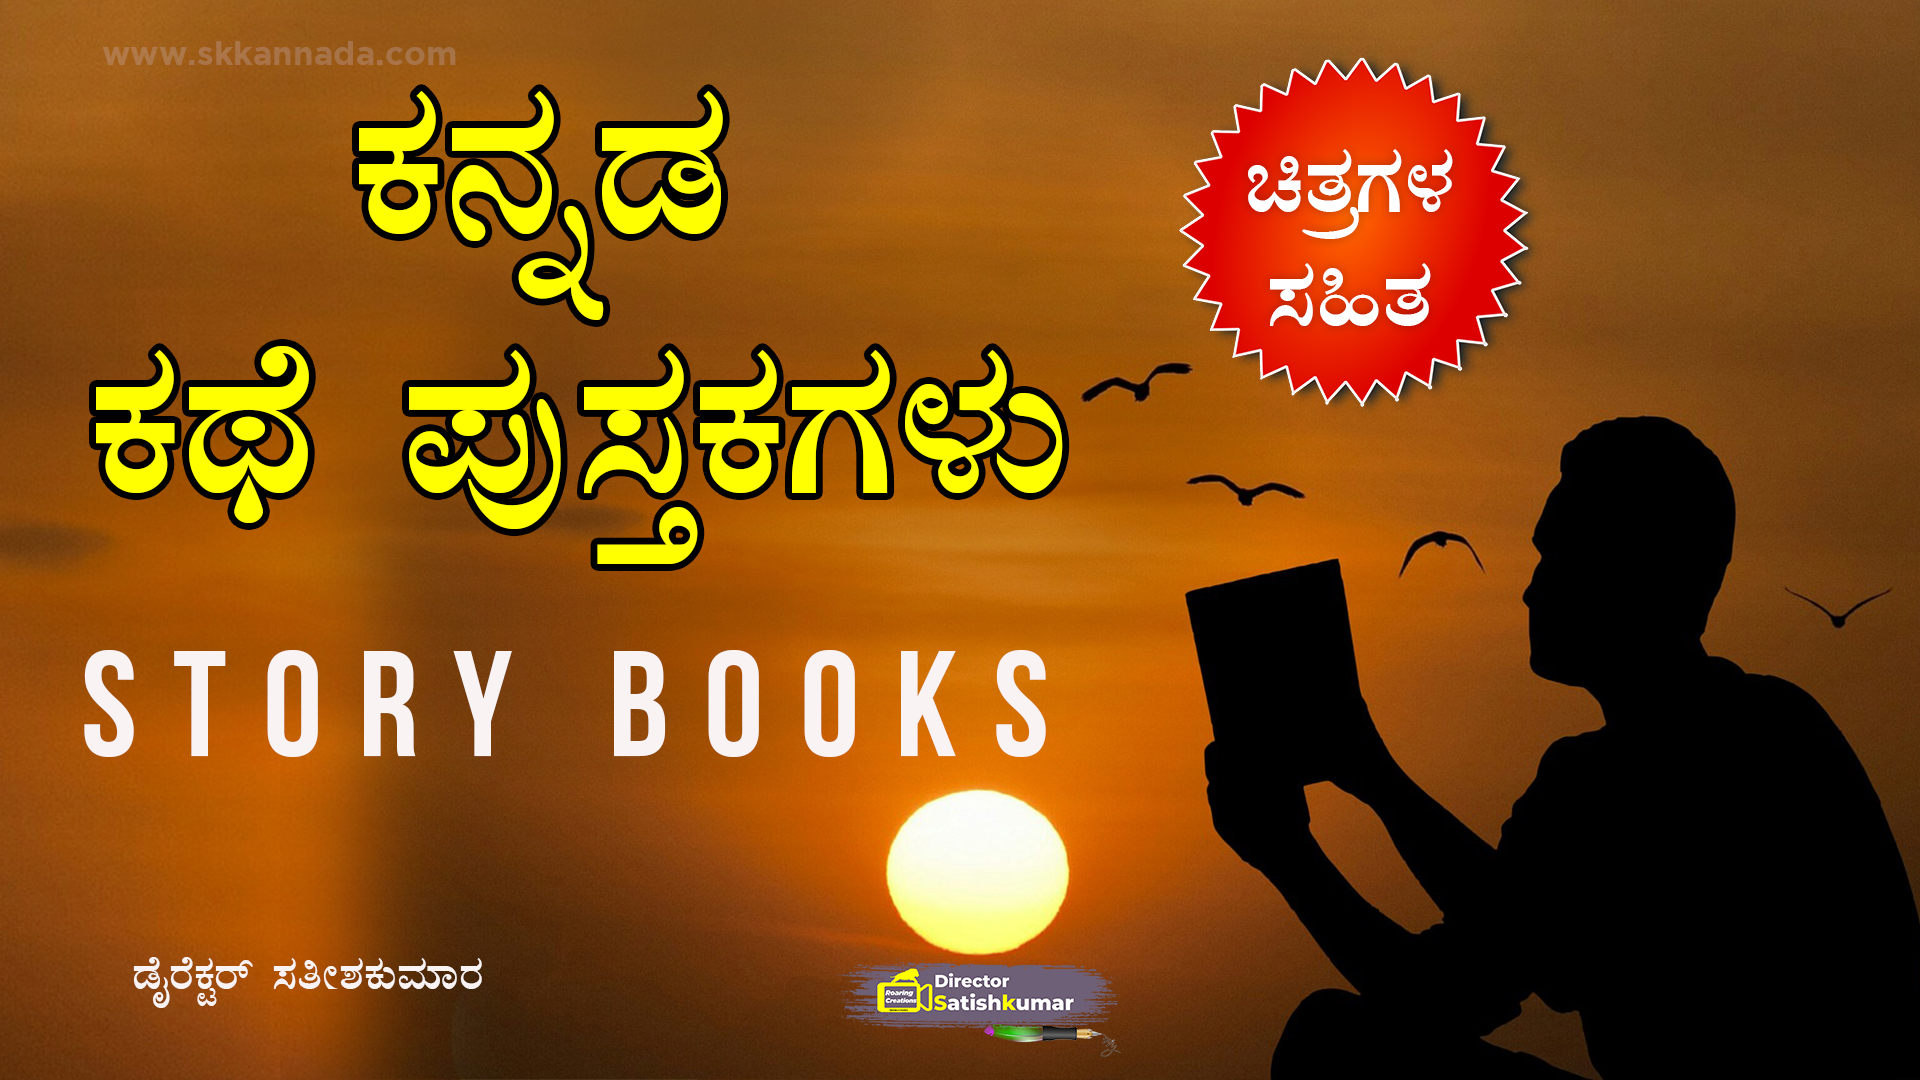 You are currently viewing ಕನ್ನಡ ಪುಸ್ತಕಗಳು – Kannada Books – ಕನ್ನಡ ಕಥೆ ಪುಸ್ತಕಗಳು – Kannada Story Books – Kannada Books Online